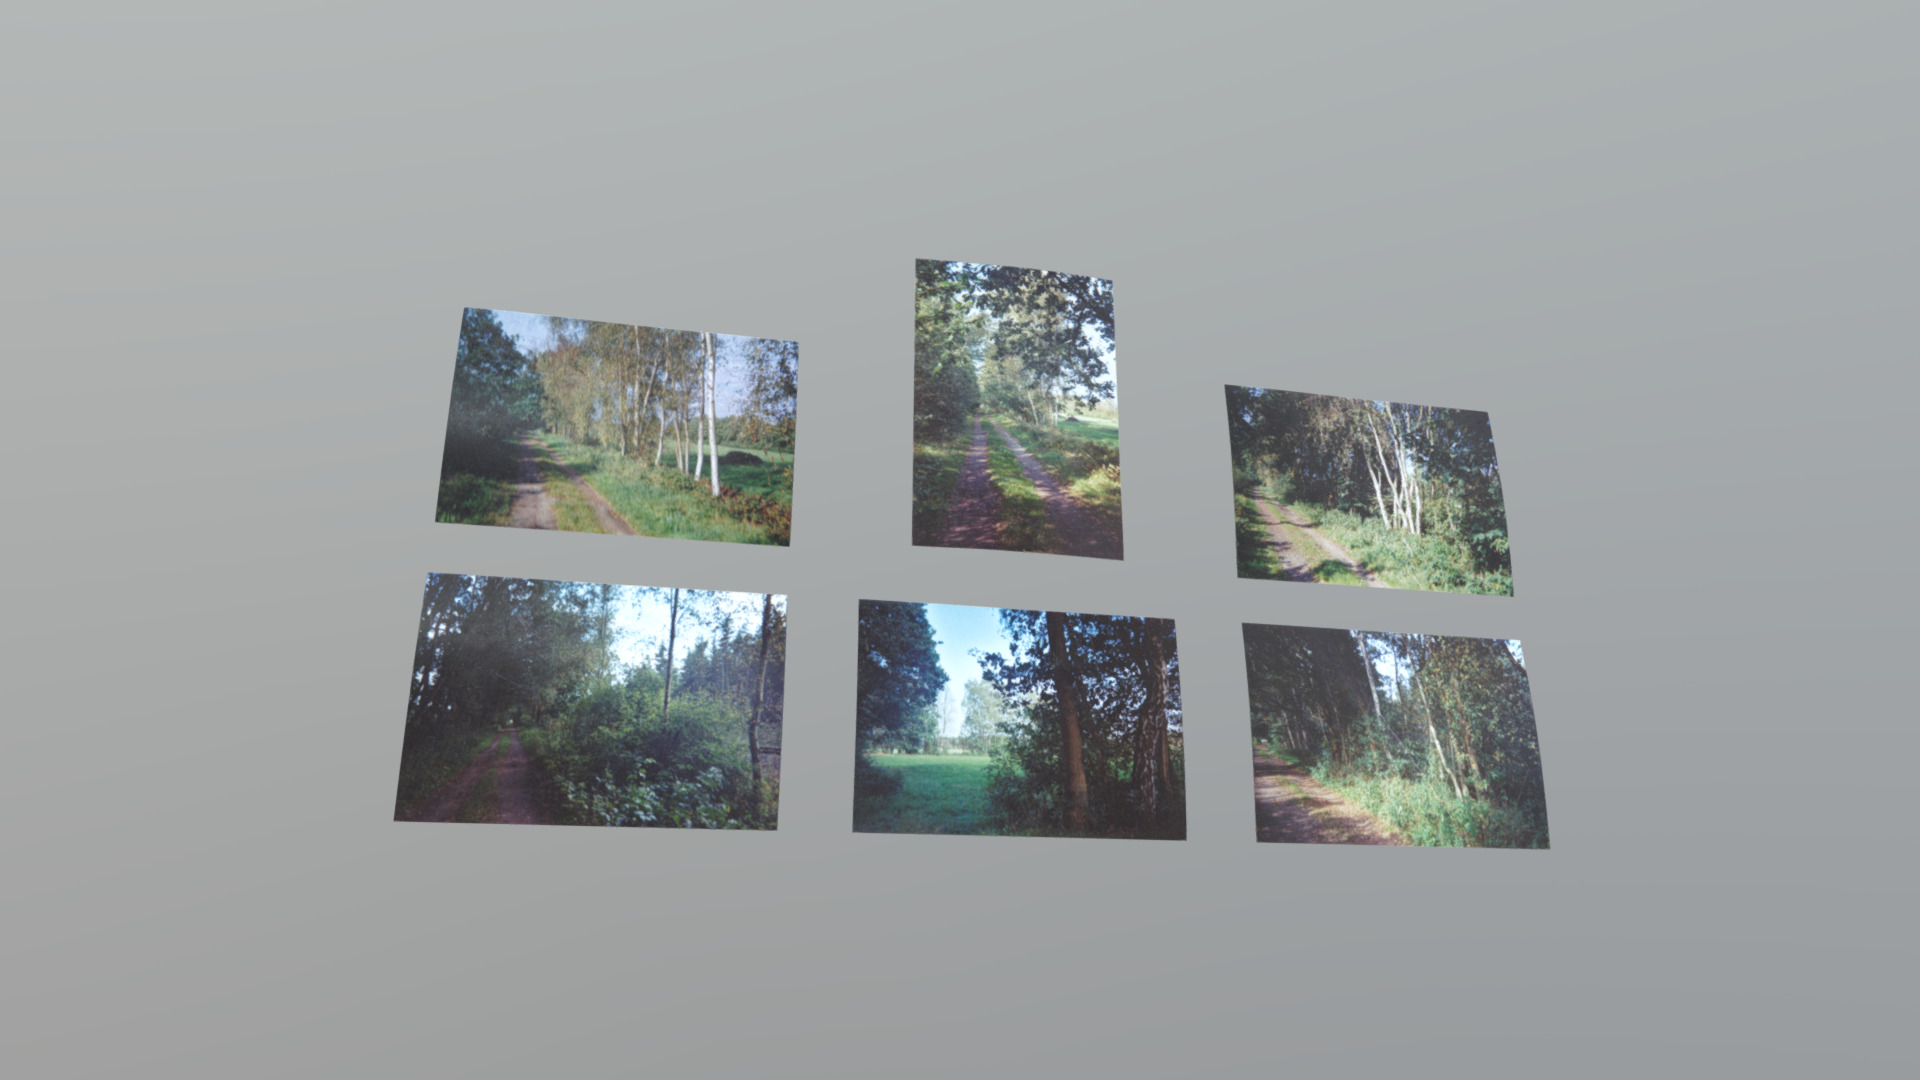 3D model Photos - This is a 3D model of the Photos. The 3D model is about a group of trees.